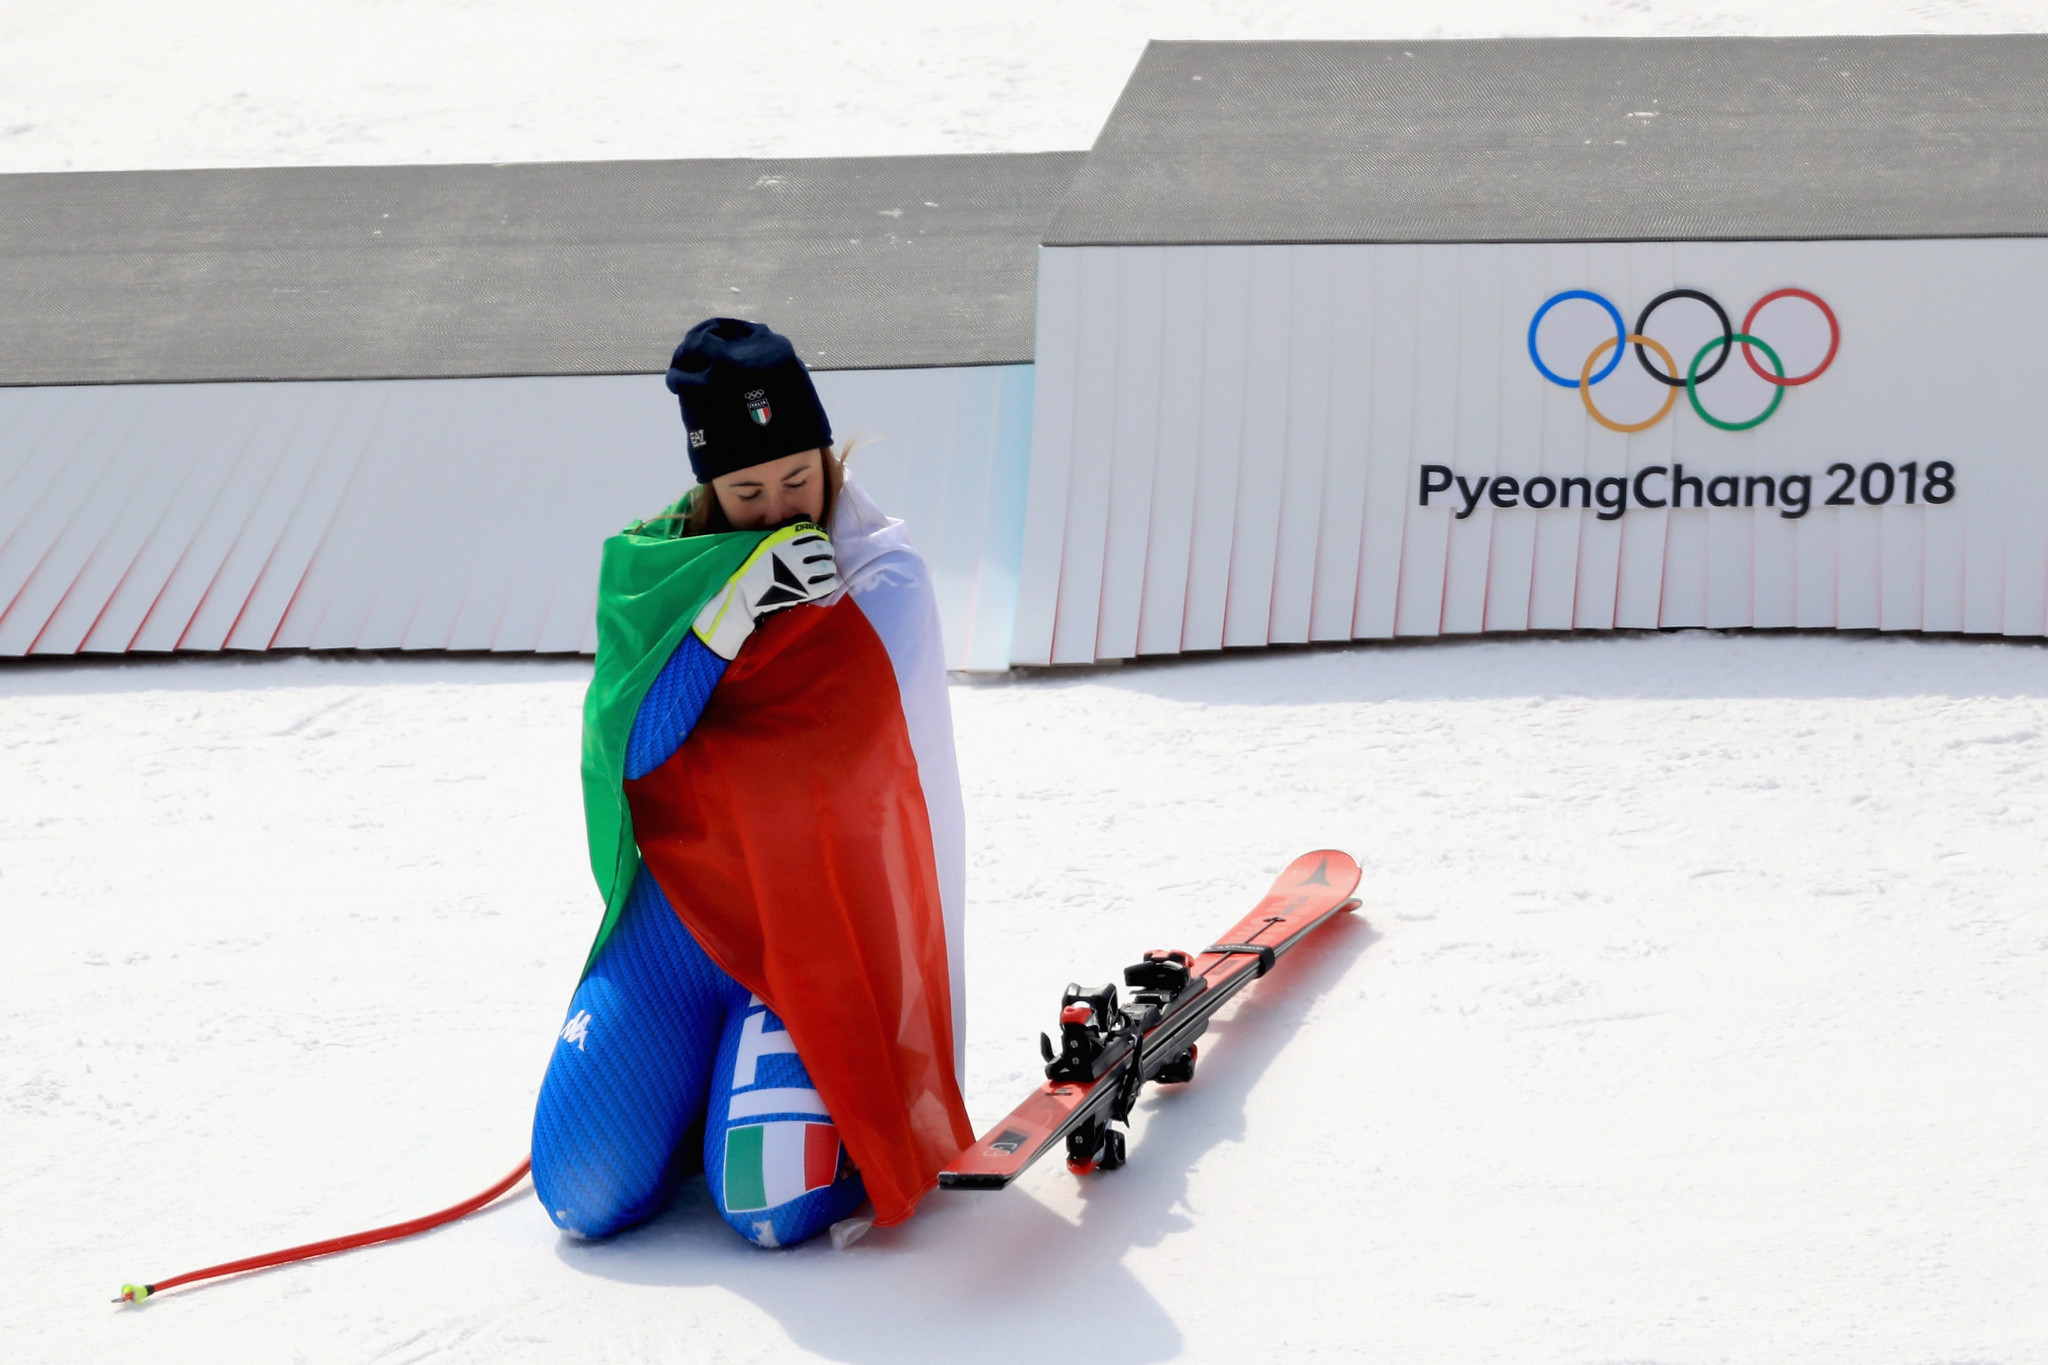 Sofia Goggia won her Olympic title at Pyeongchang 2018 ©Getty Images